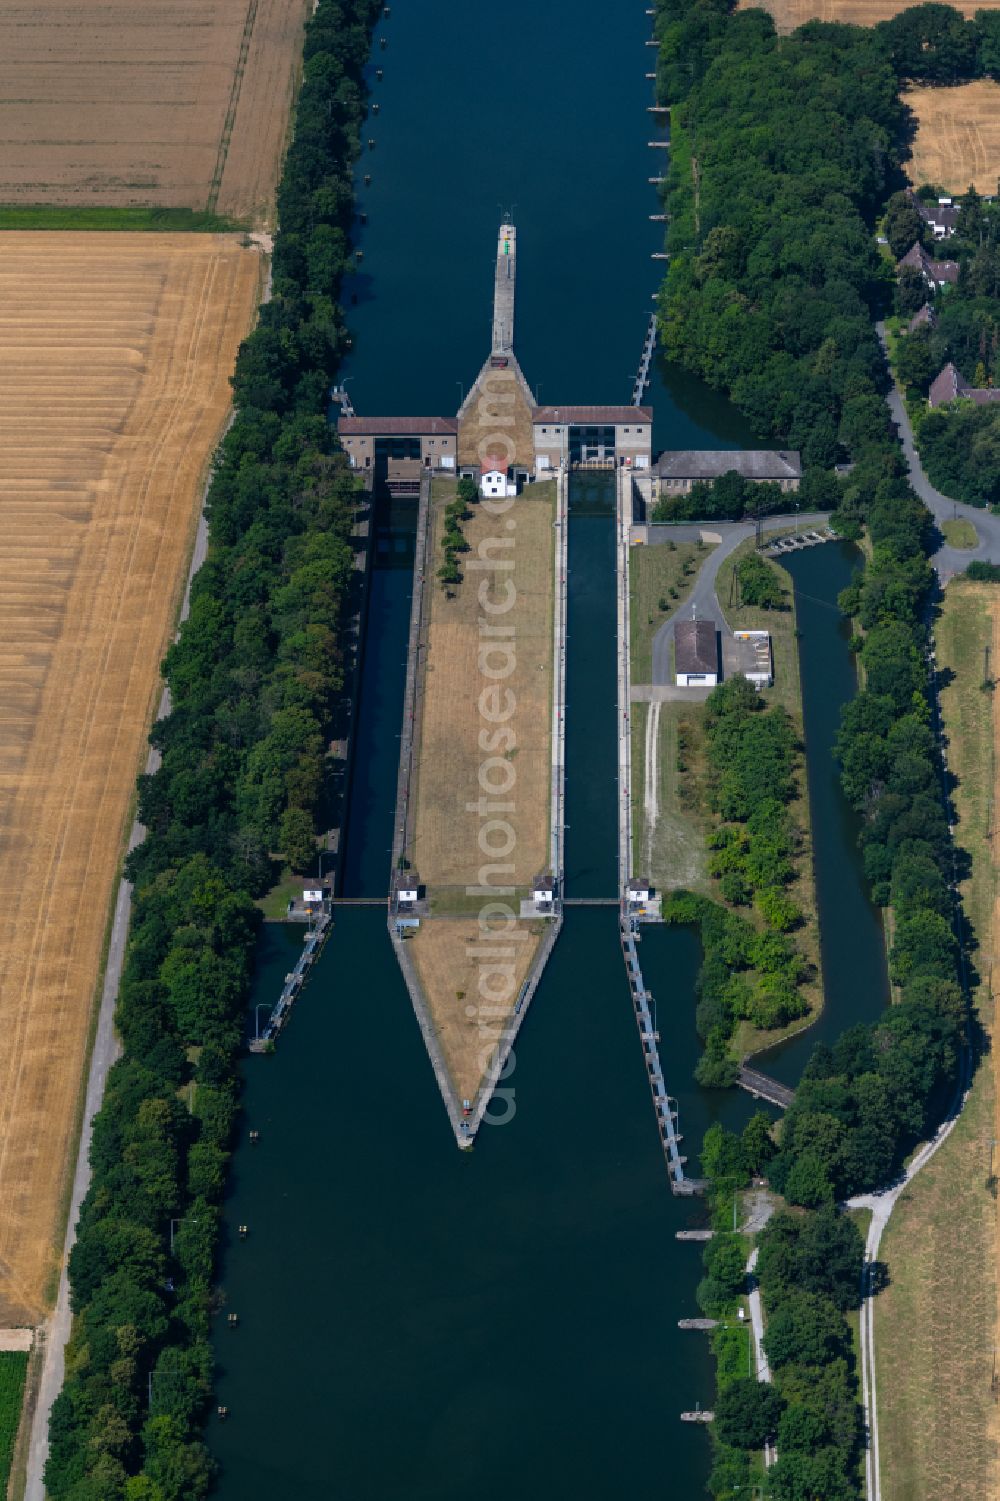 Üfingen from the bird's eye view: Barrage sluice systems Schleuse Uefingen on the branch canal Salzgitter in Uefingen in the state Lower Saxony, Germany